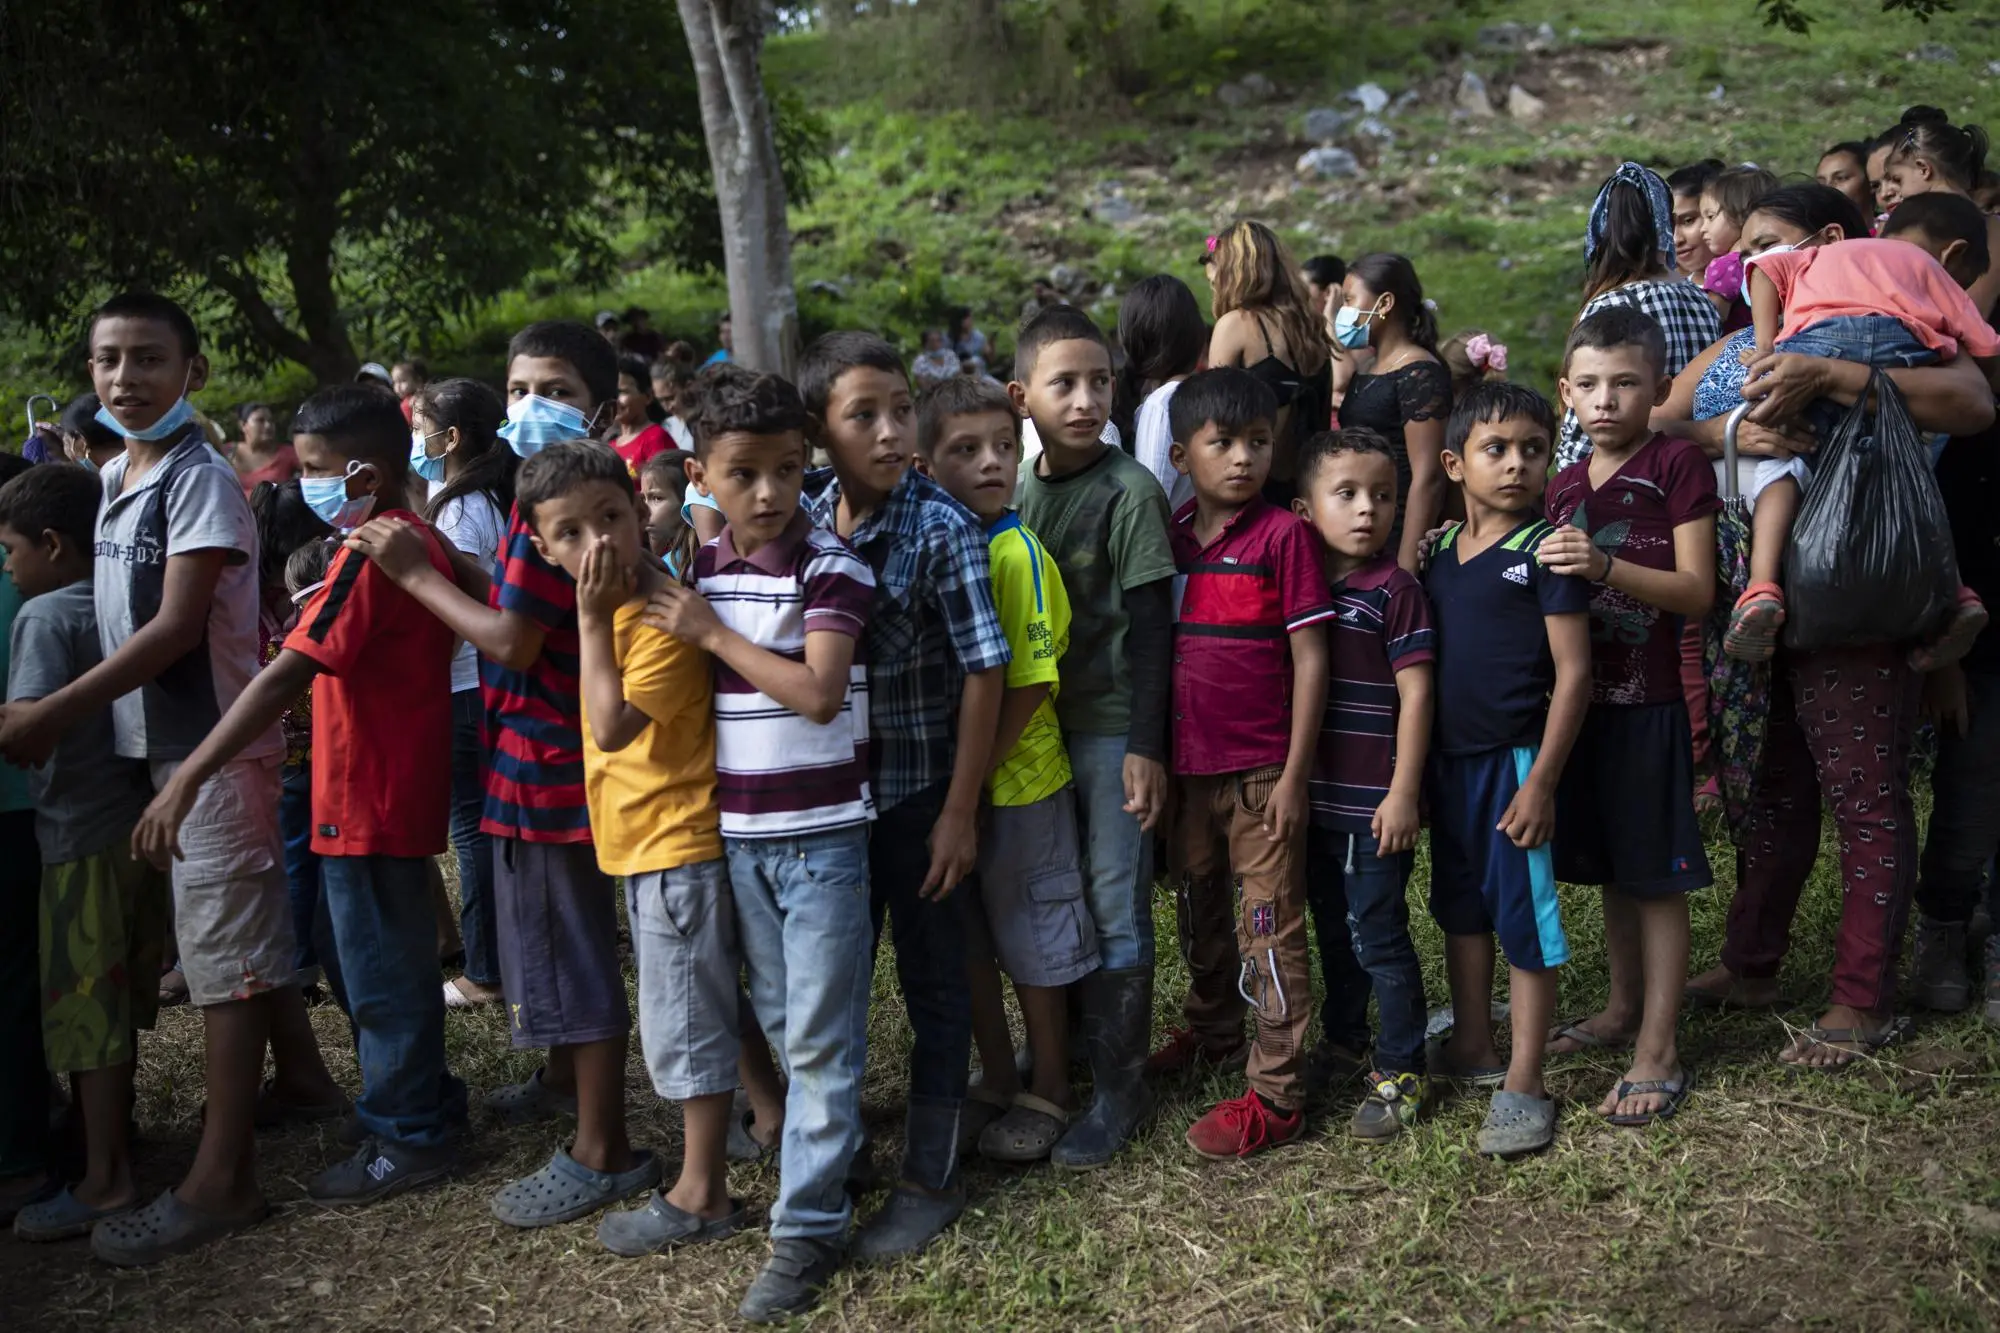 Children wait in line for toys from government officials